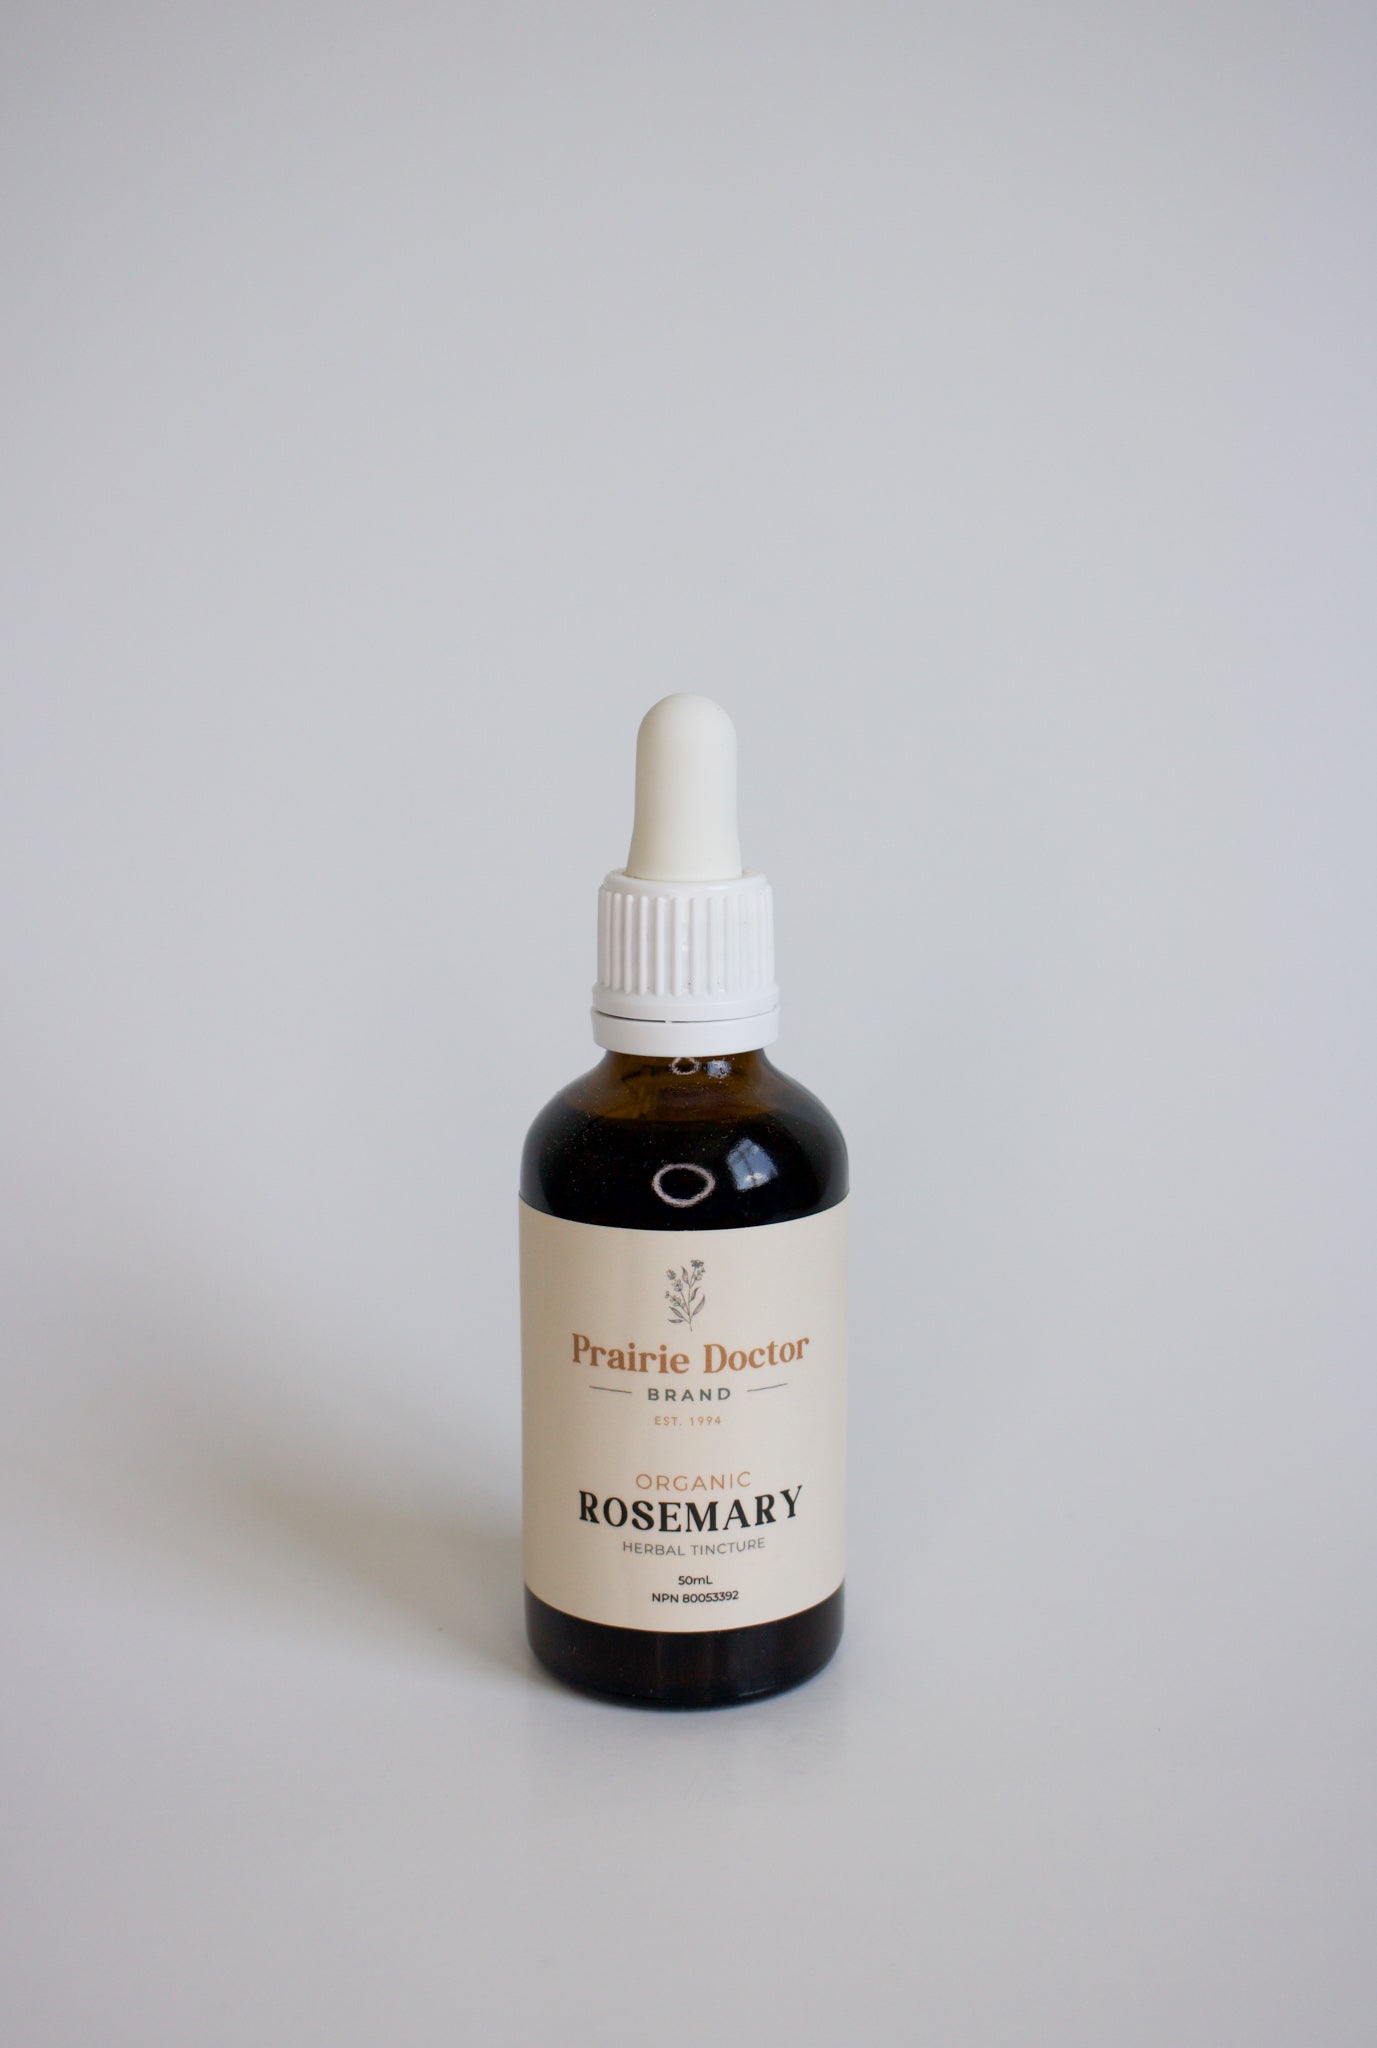 Our organic Rosemary herbal tincture has traditionally been used in Herbal Medicine to help ease (gastric) headaches and relieve flatulent indigestion (carminative).